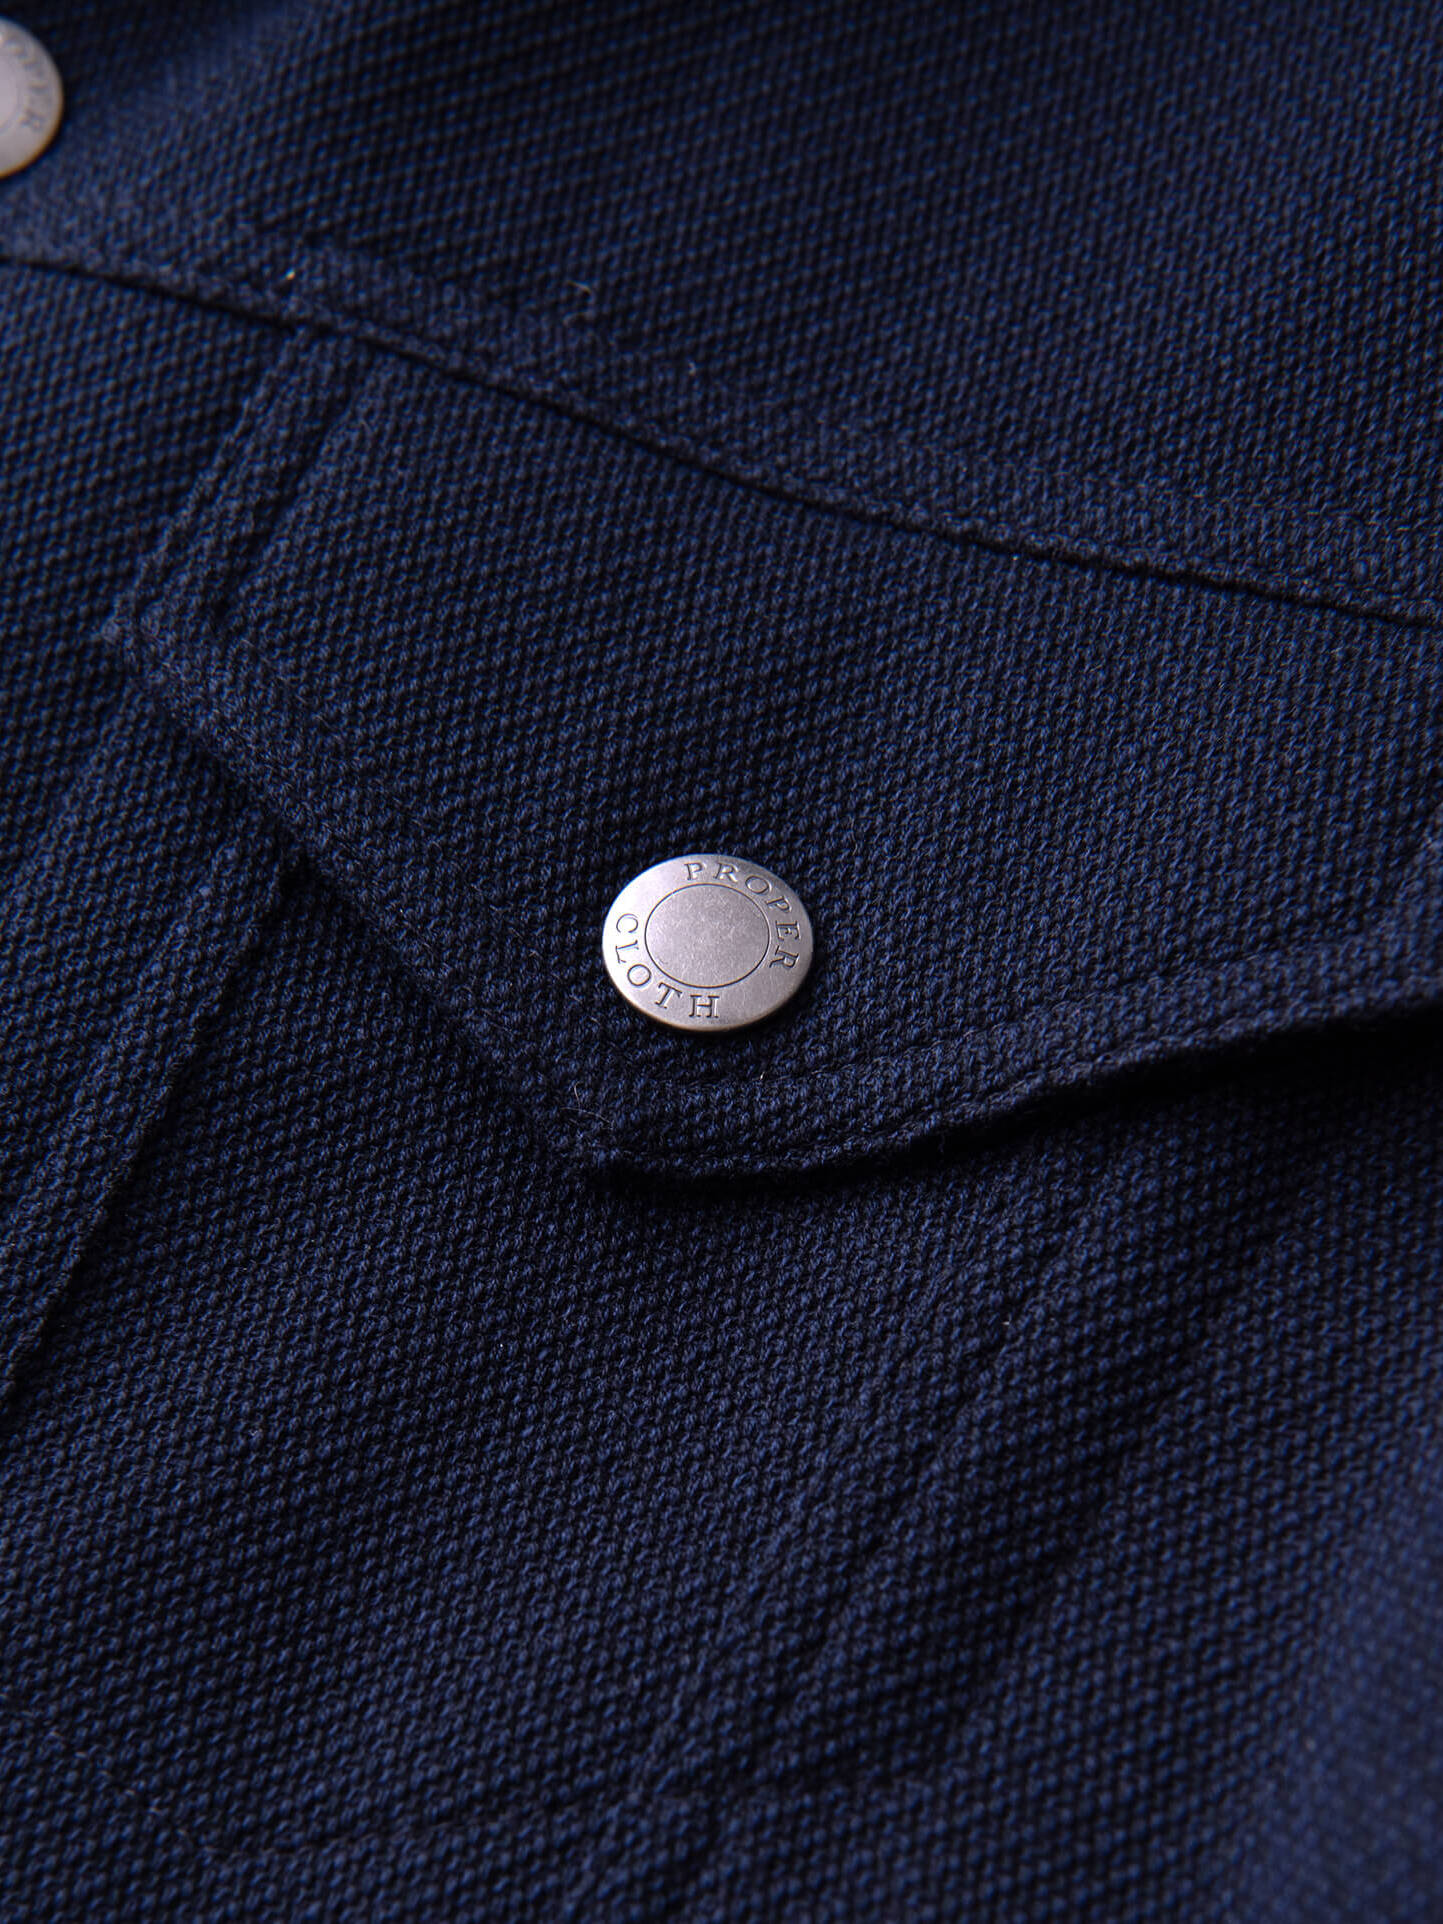 Lafayette Navy Blue Wool and Cotton Trucker Jacket by Proper Cloth